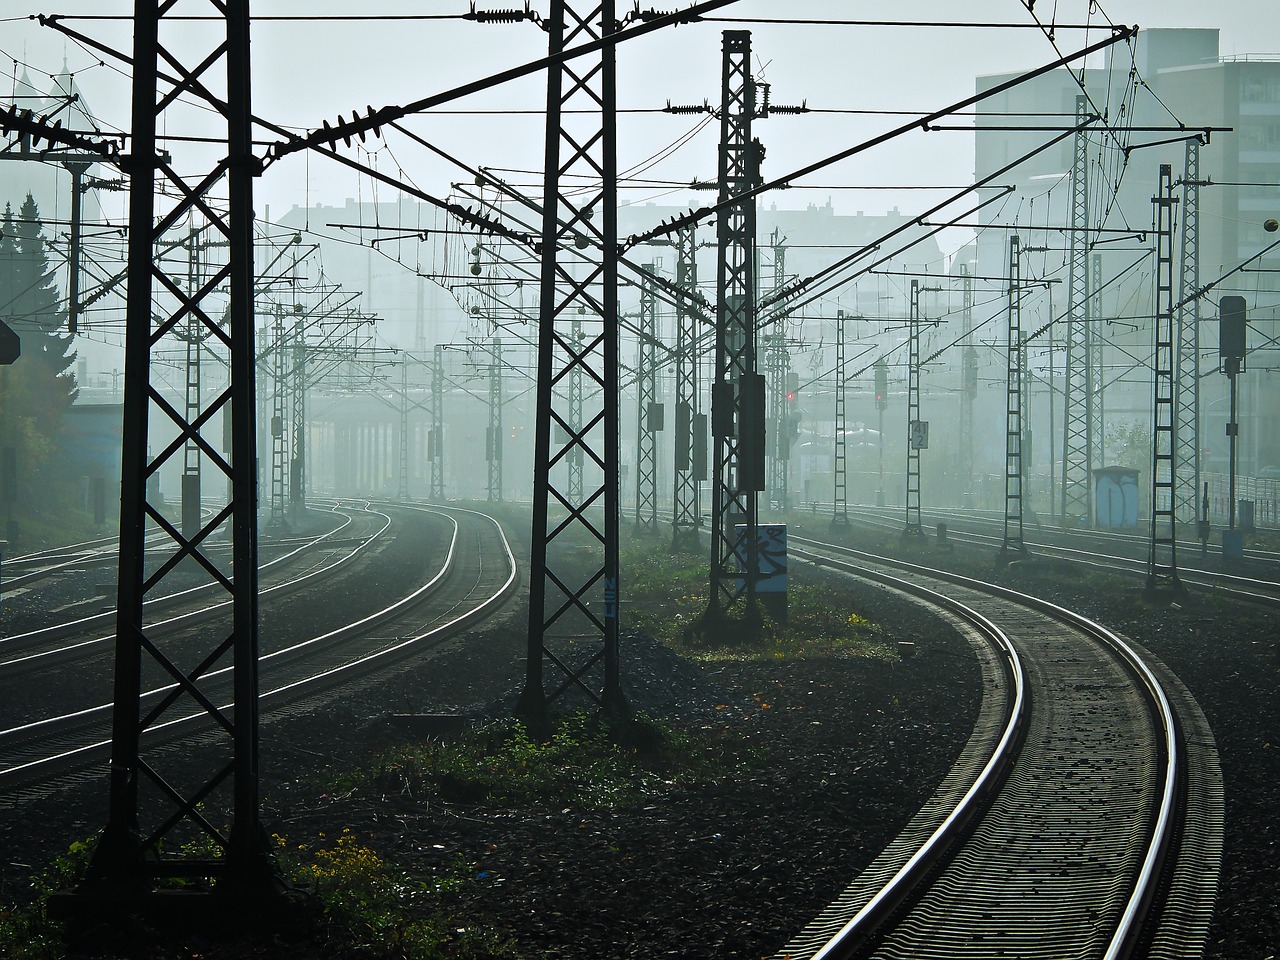 Europe revises a series of standards for railway